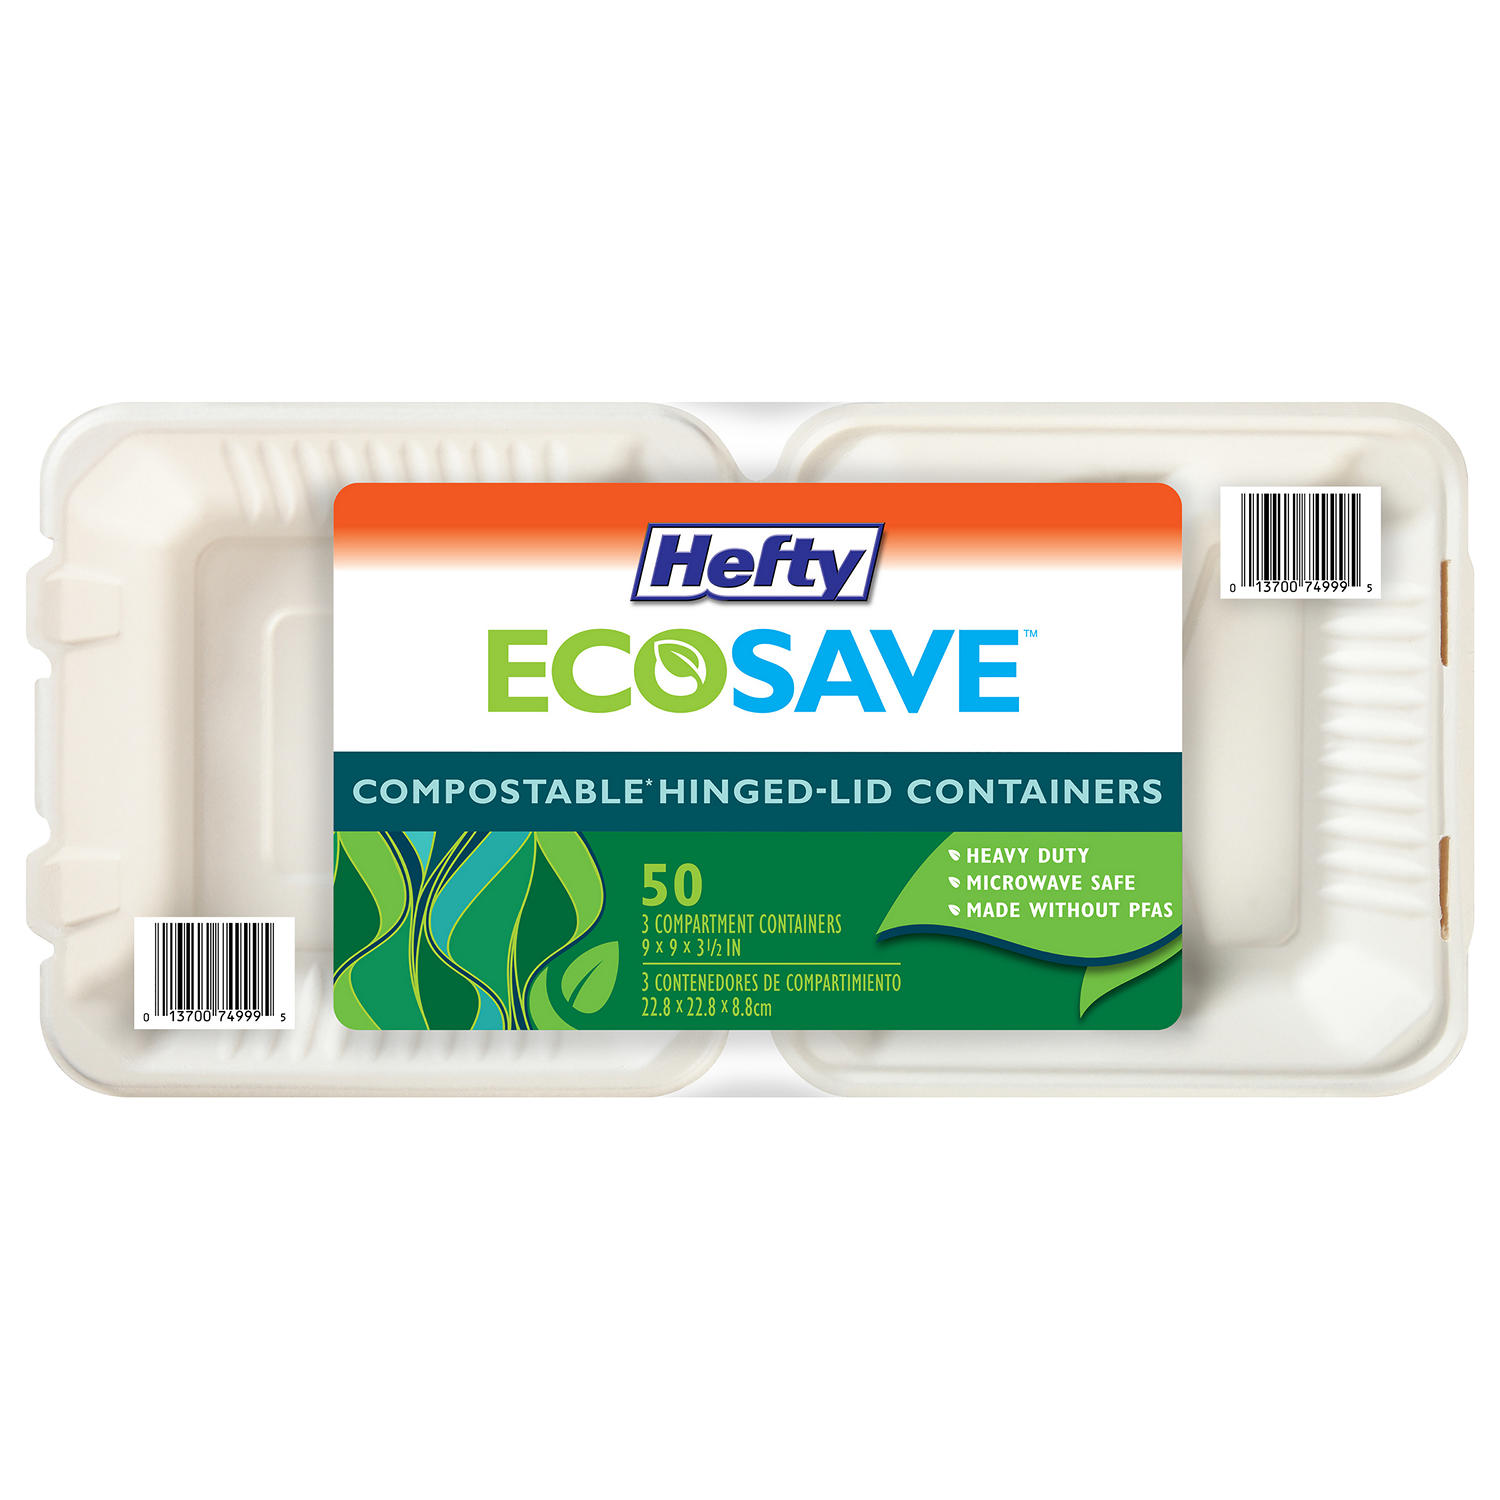 Hefty ECOSAVE 3-Compartment Hinged Lid Container (9' x 9', 50 ct.)